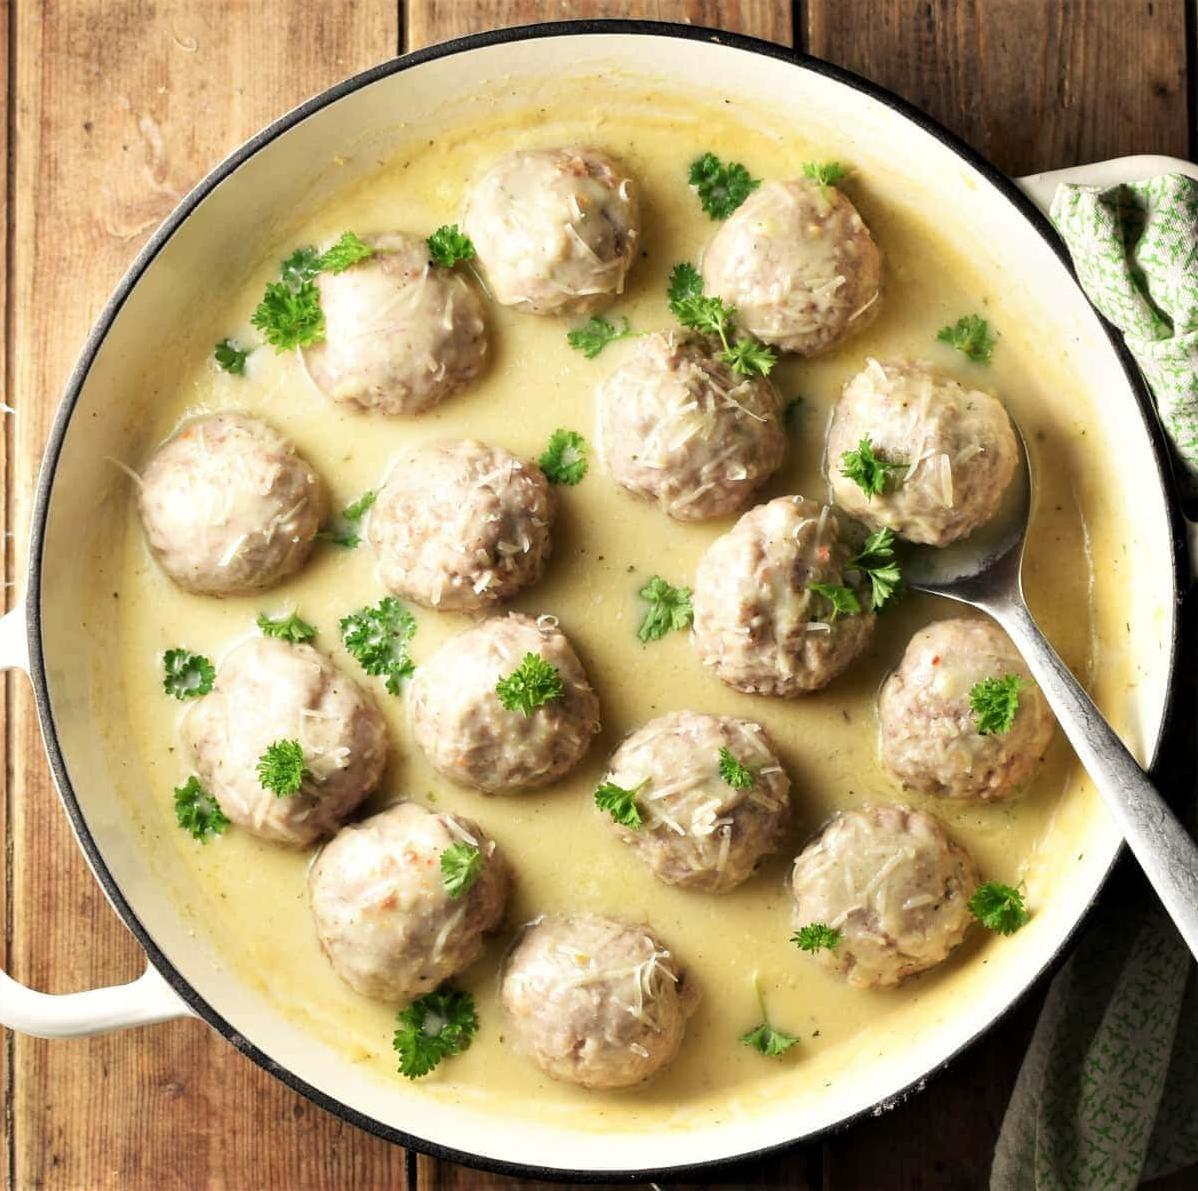  Dinner just got a lot more exciting with these meatballs